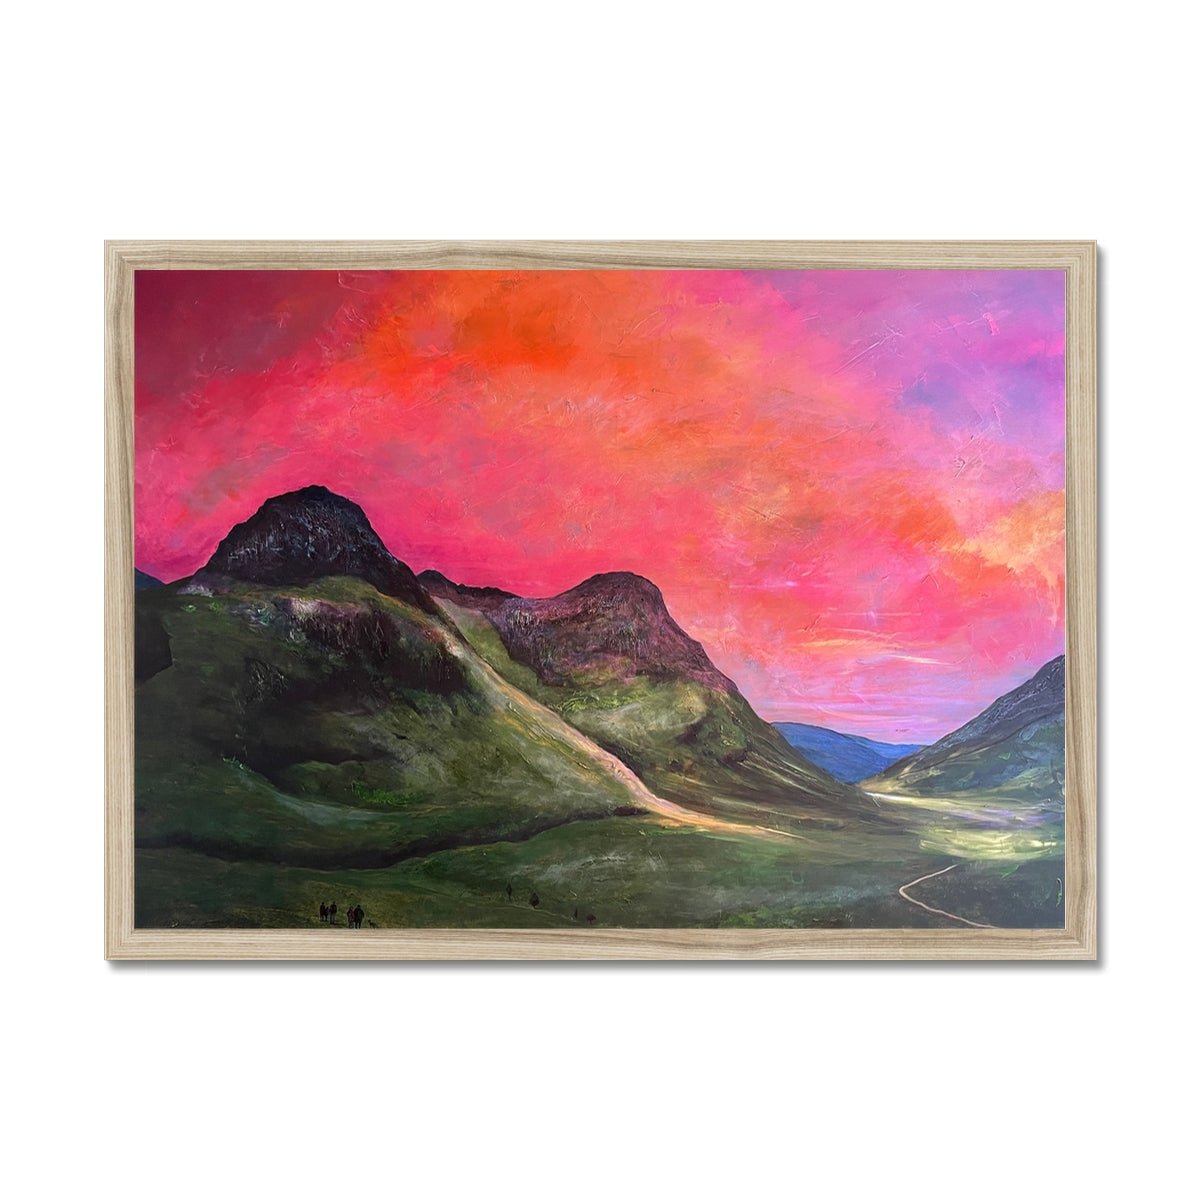 Glencoe Dusk Painting | Framed Prints From Scotland-Framed Prints-Glencoe Art Gallery-A2 Landscape-Natural Frame-Paintings, Prints, Homeware, Art Gifts From Scotland By Scottish Artist Kevin Hunter